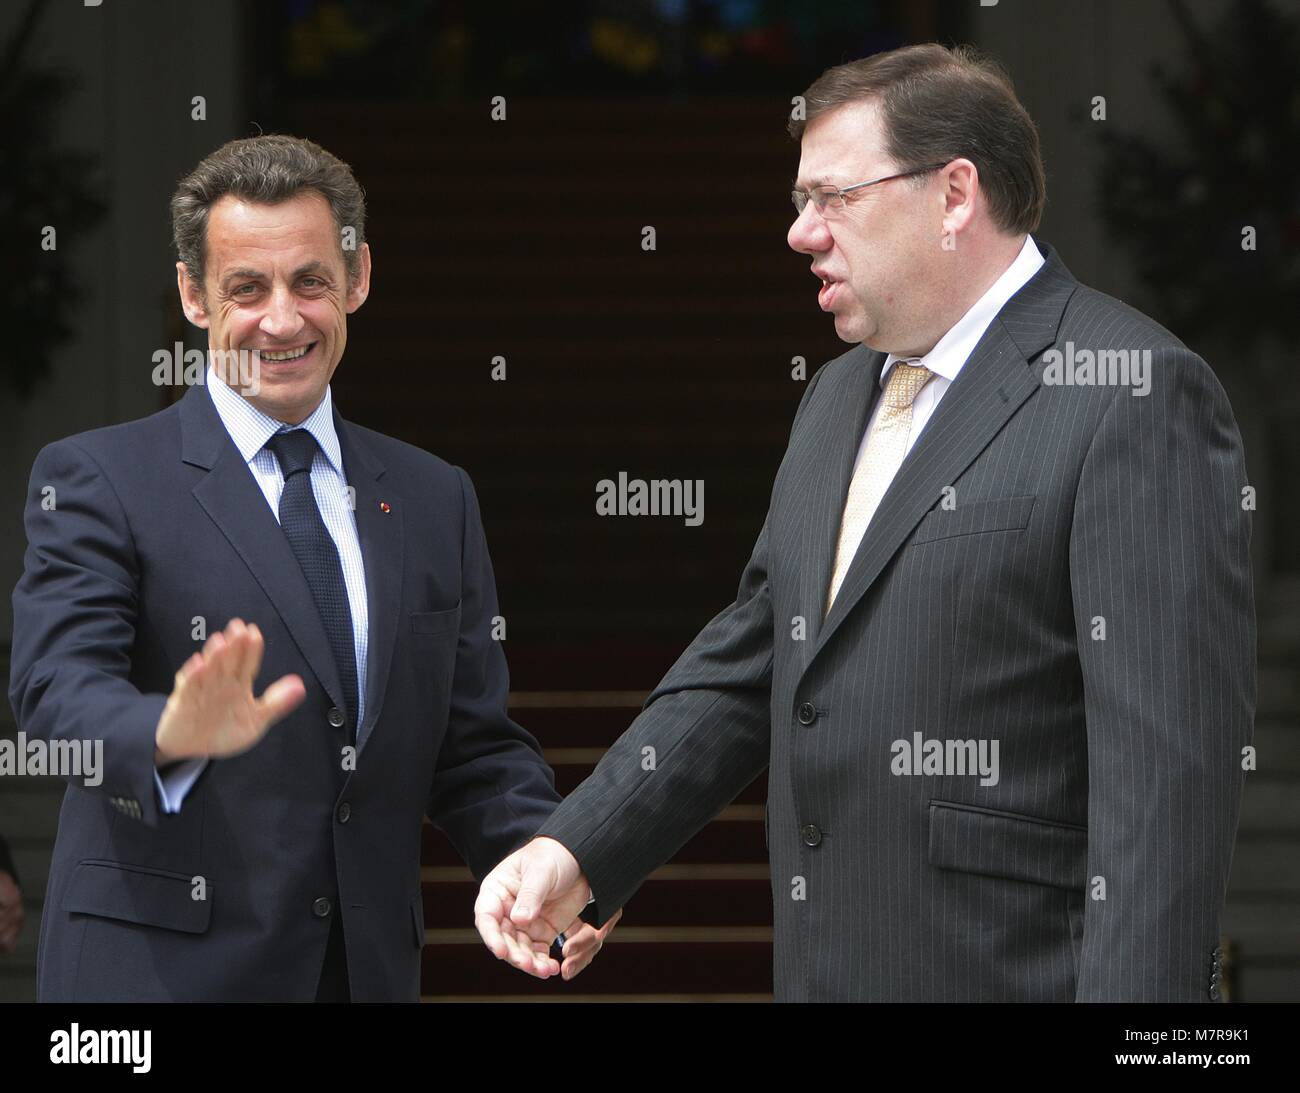 French President Nicolas Sarkozy is greeted by Taoiseach Brian Cowen at Government Buildings in Dublin, Monday 21, July 2008. Sarkozy will meet the two main opposition leaders - Fine Gael's Enda Kenny and Labour's Eamon Gilmore and talks with groups who opposed and supported the Lisbon Treaty. Photo/Paul McErlane Stock Photo